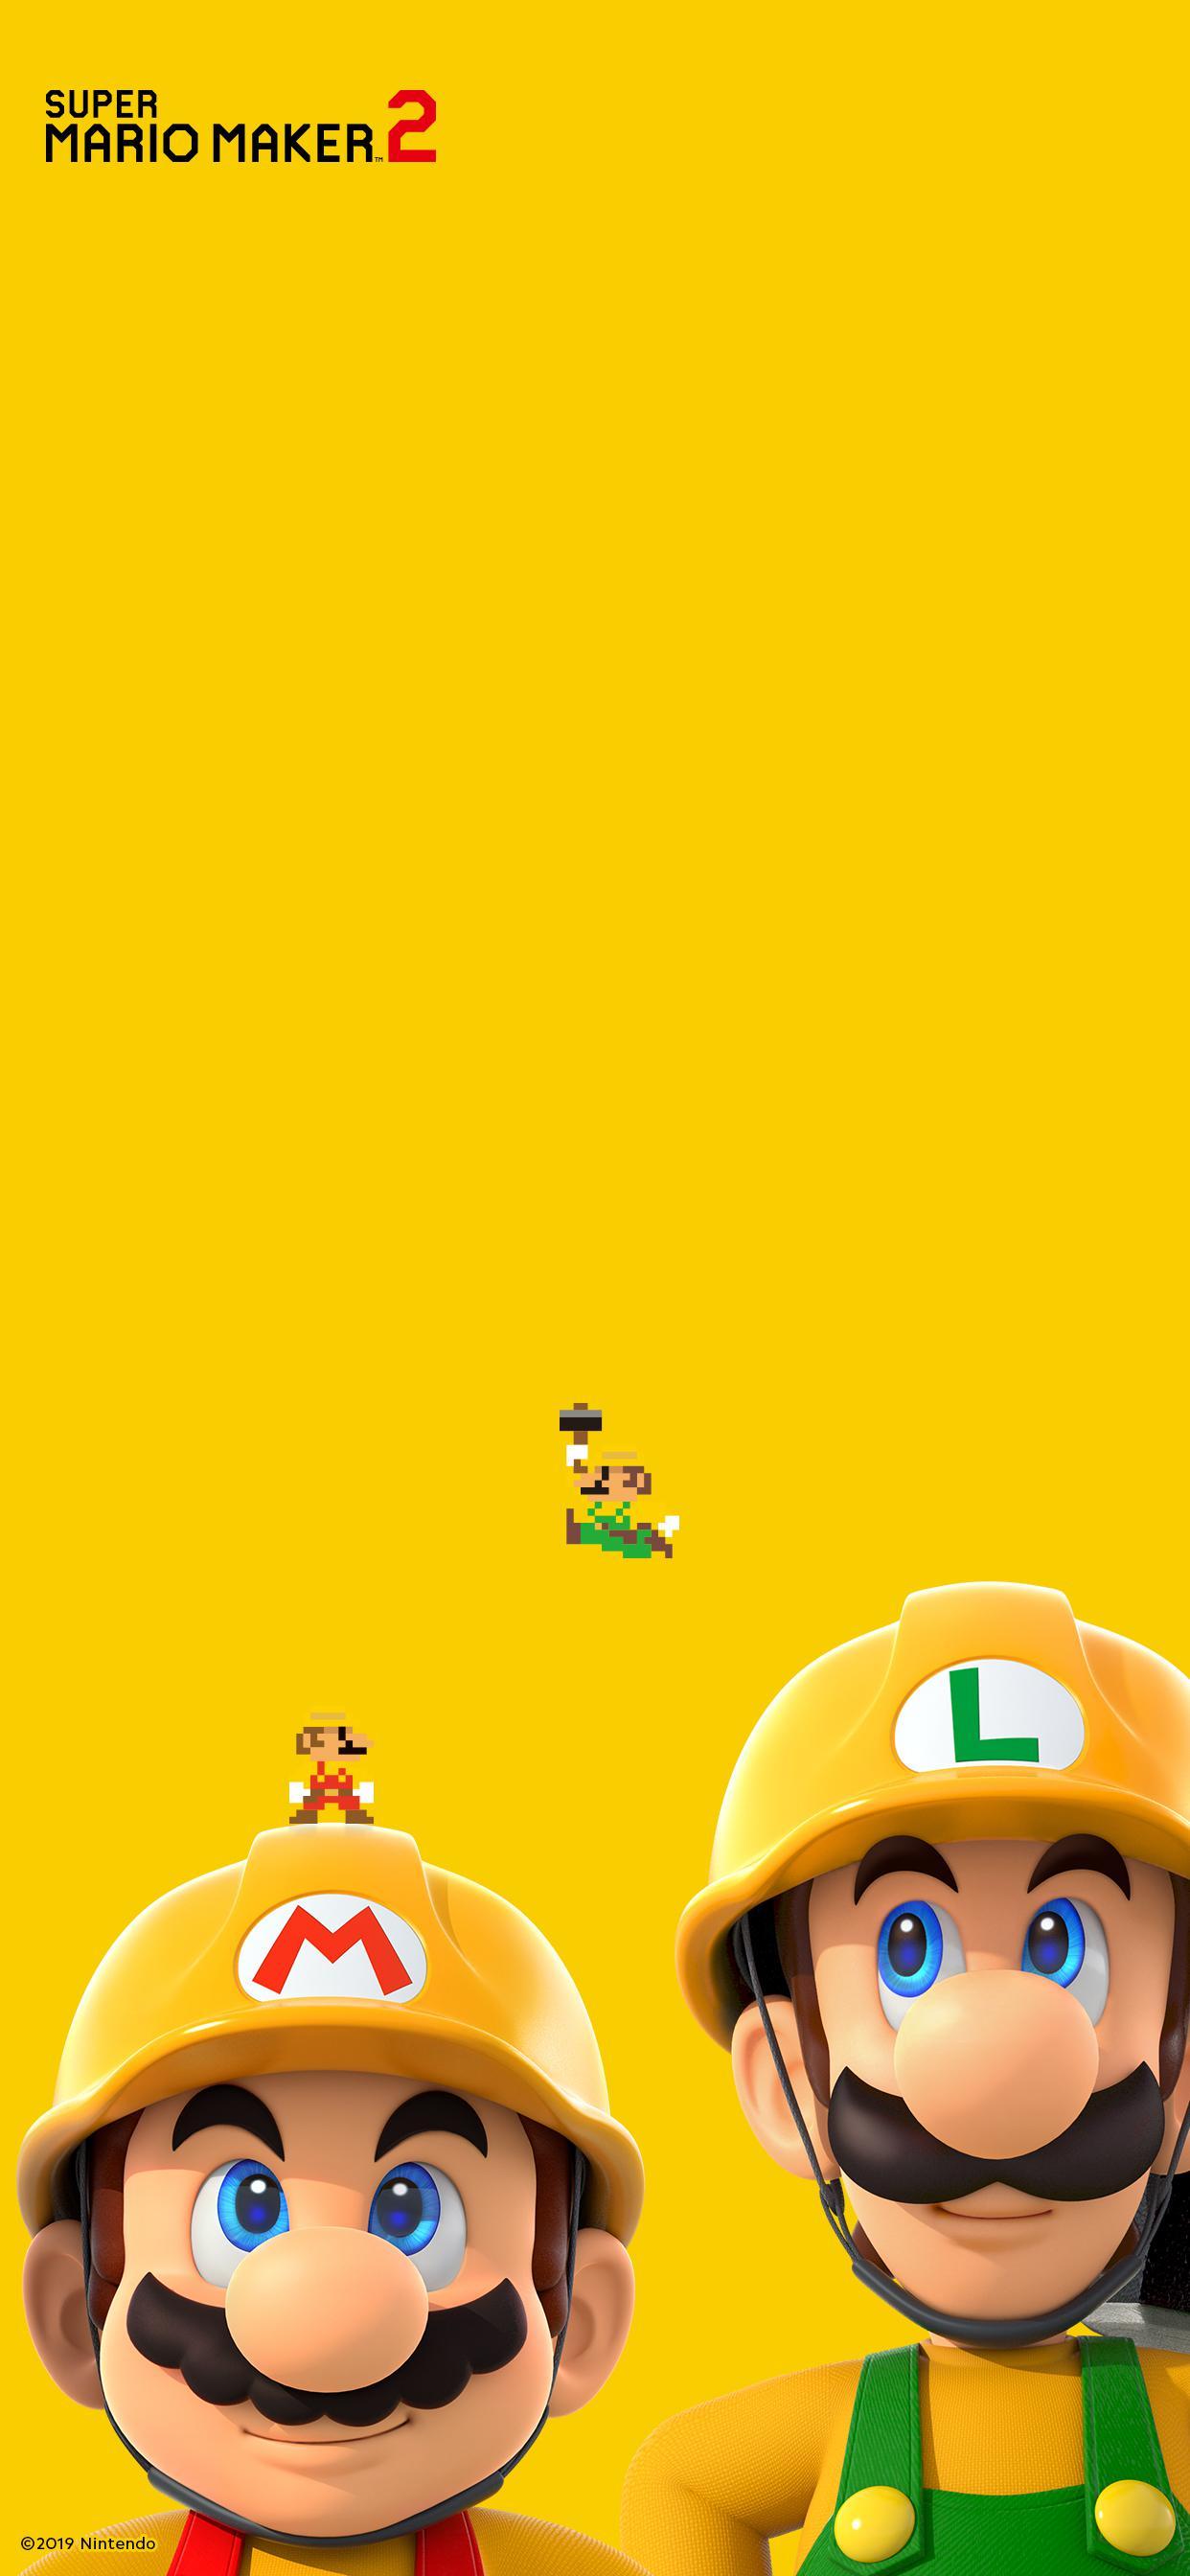 this is the wallpaper of super Mario maker 2